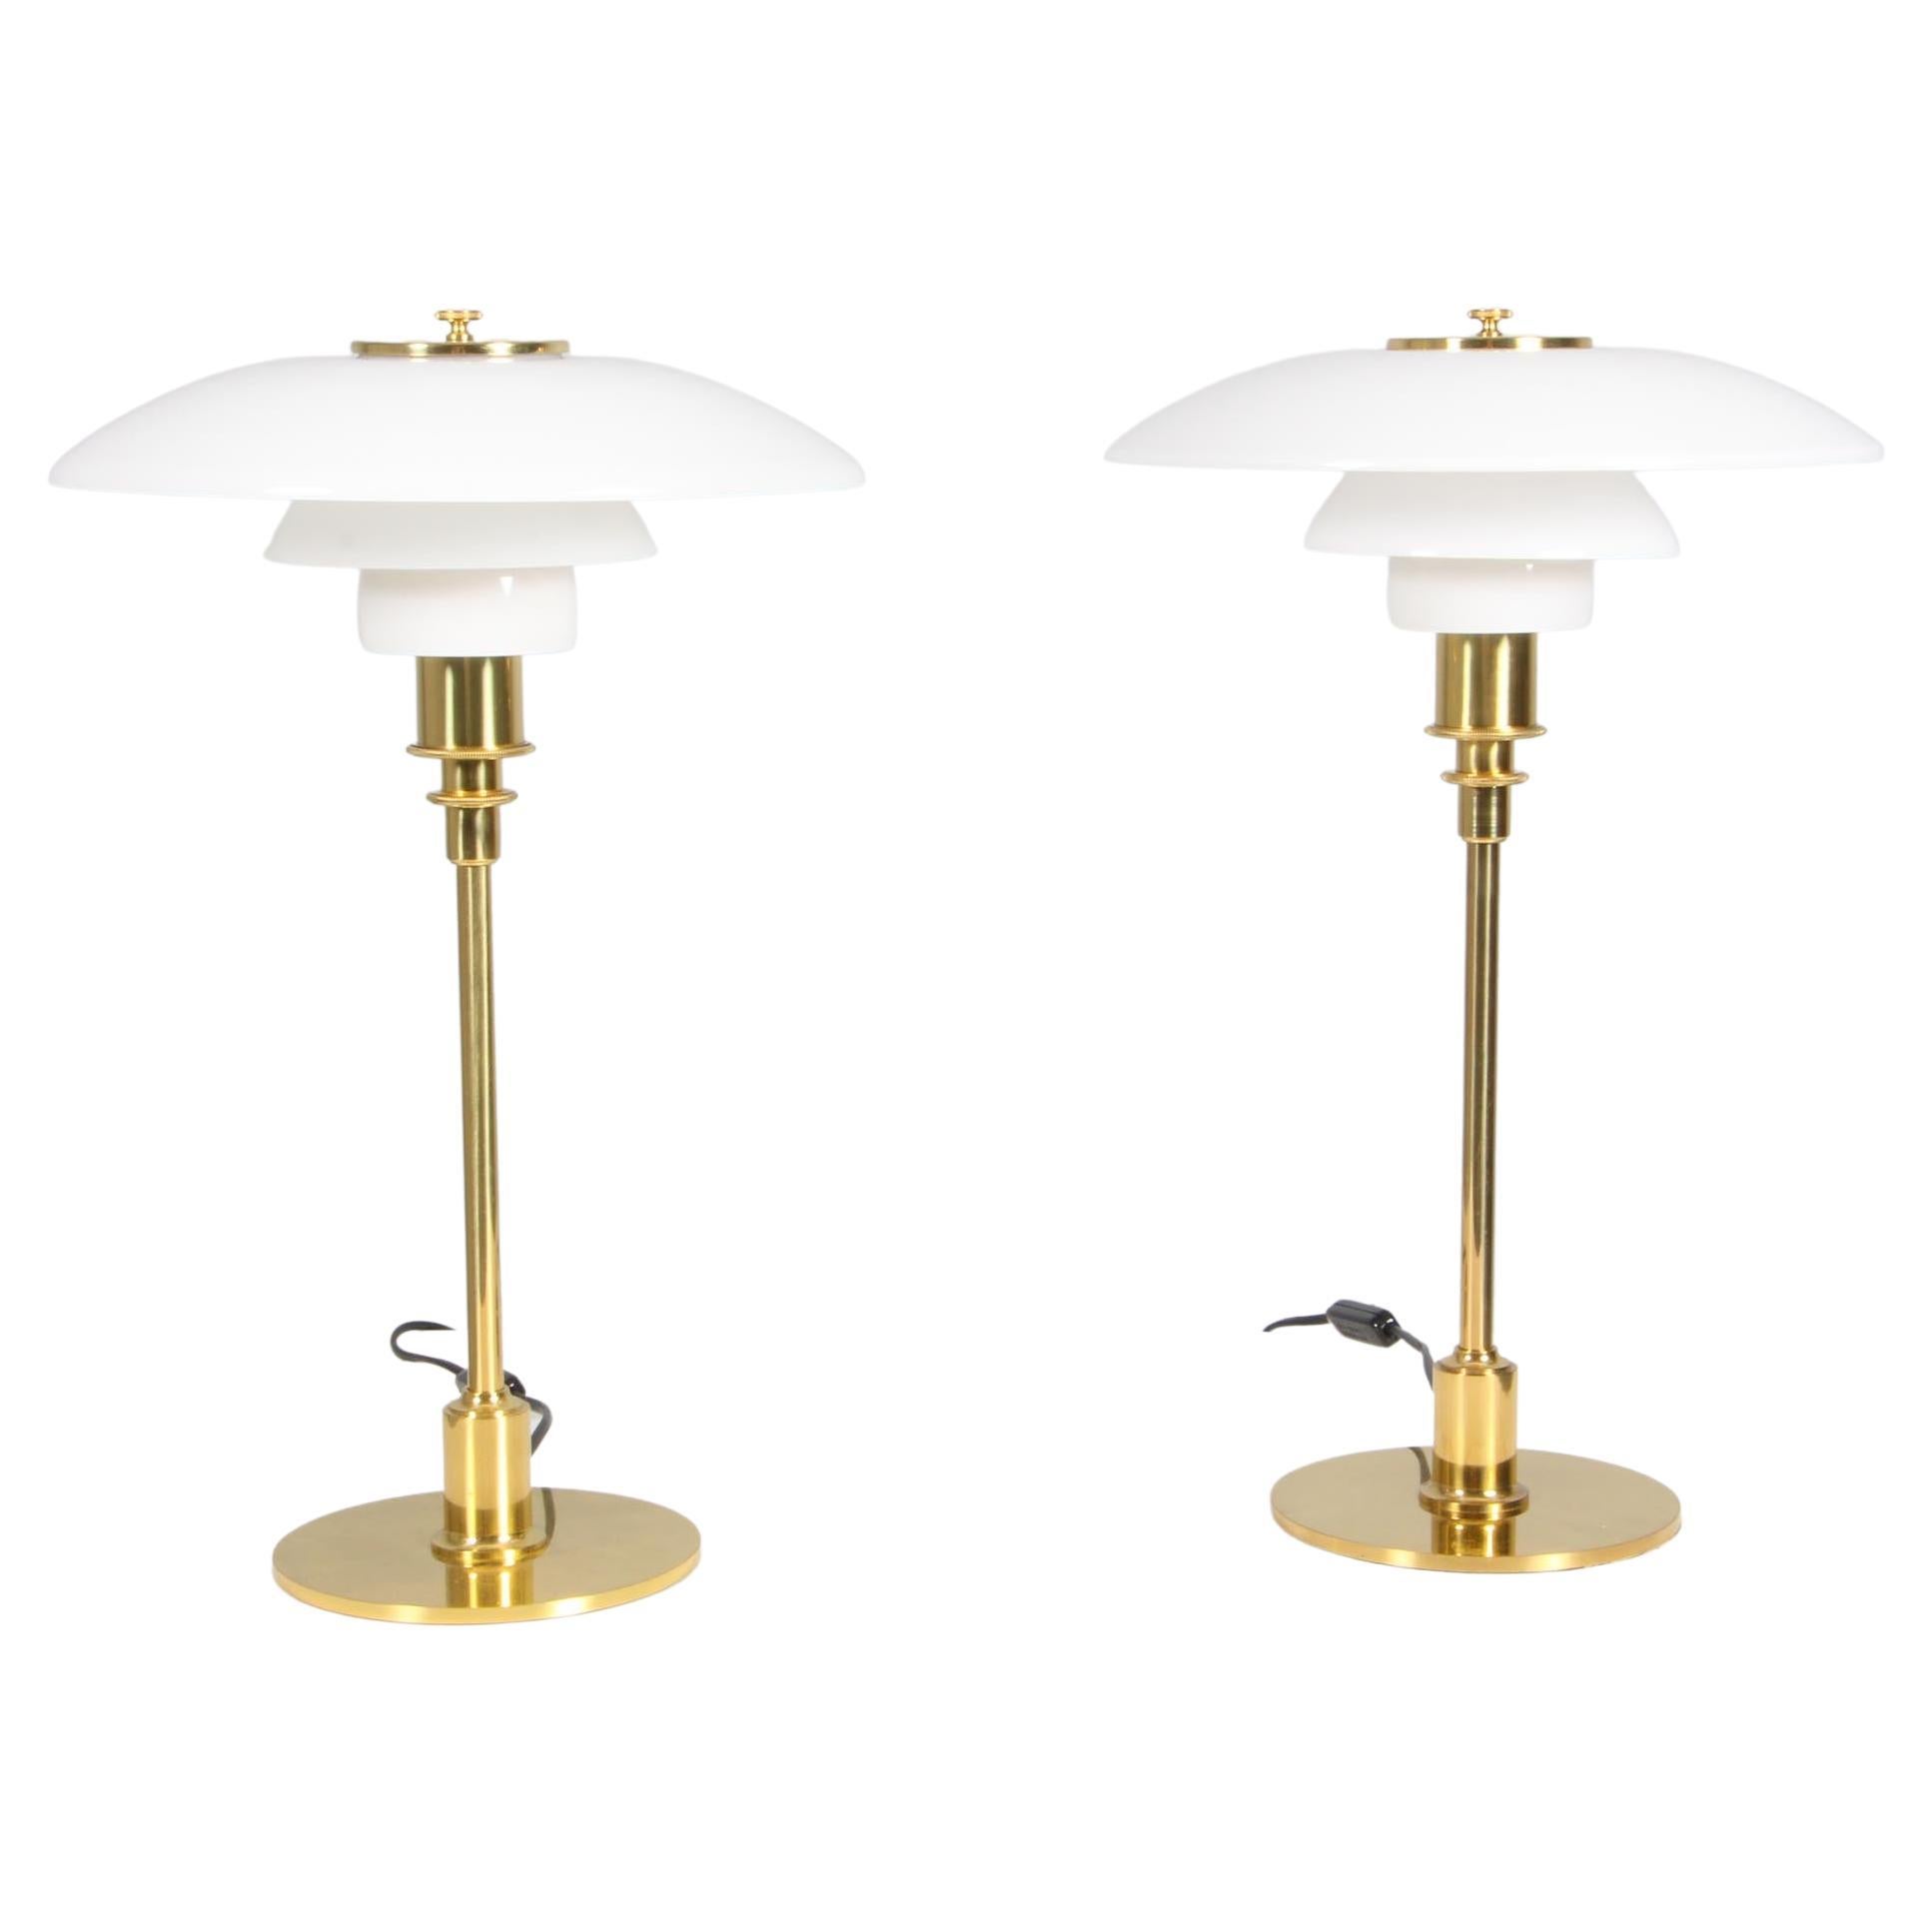 PH 3/2  brassTable Lamps by Poul Henningsen. Annivesary edition